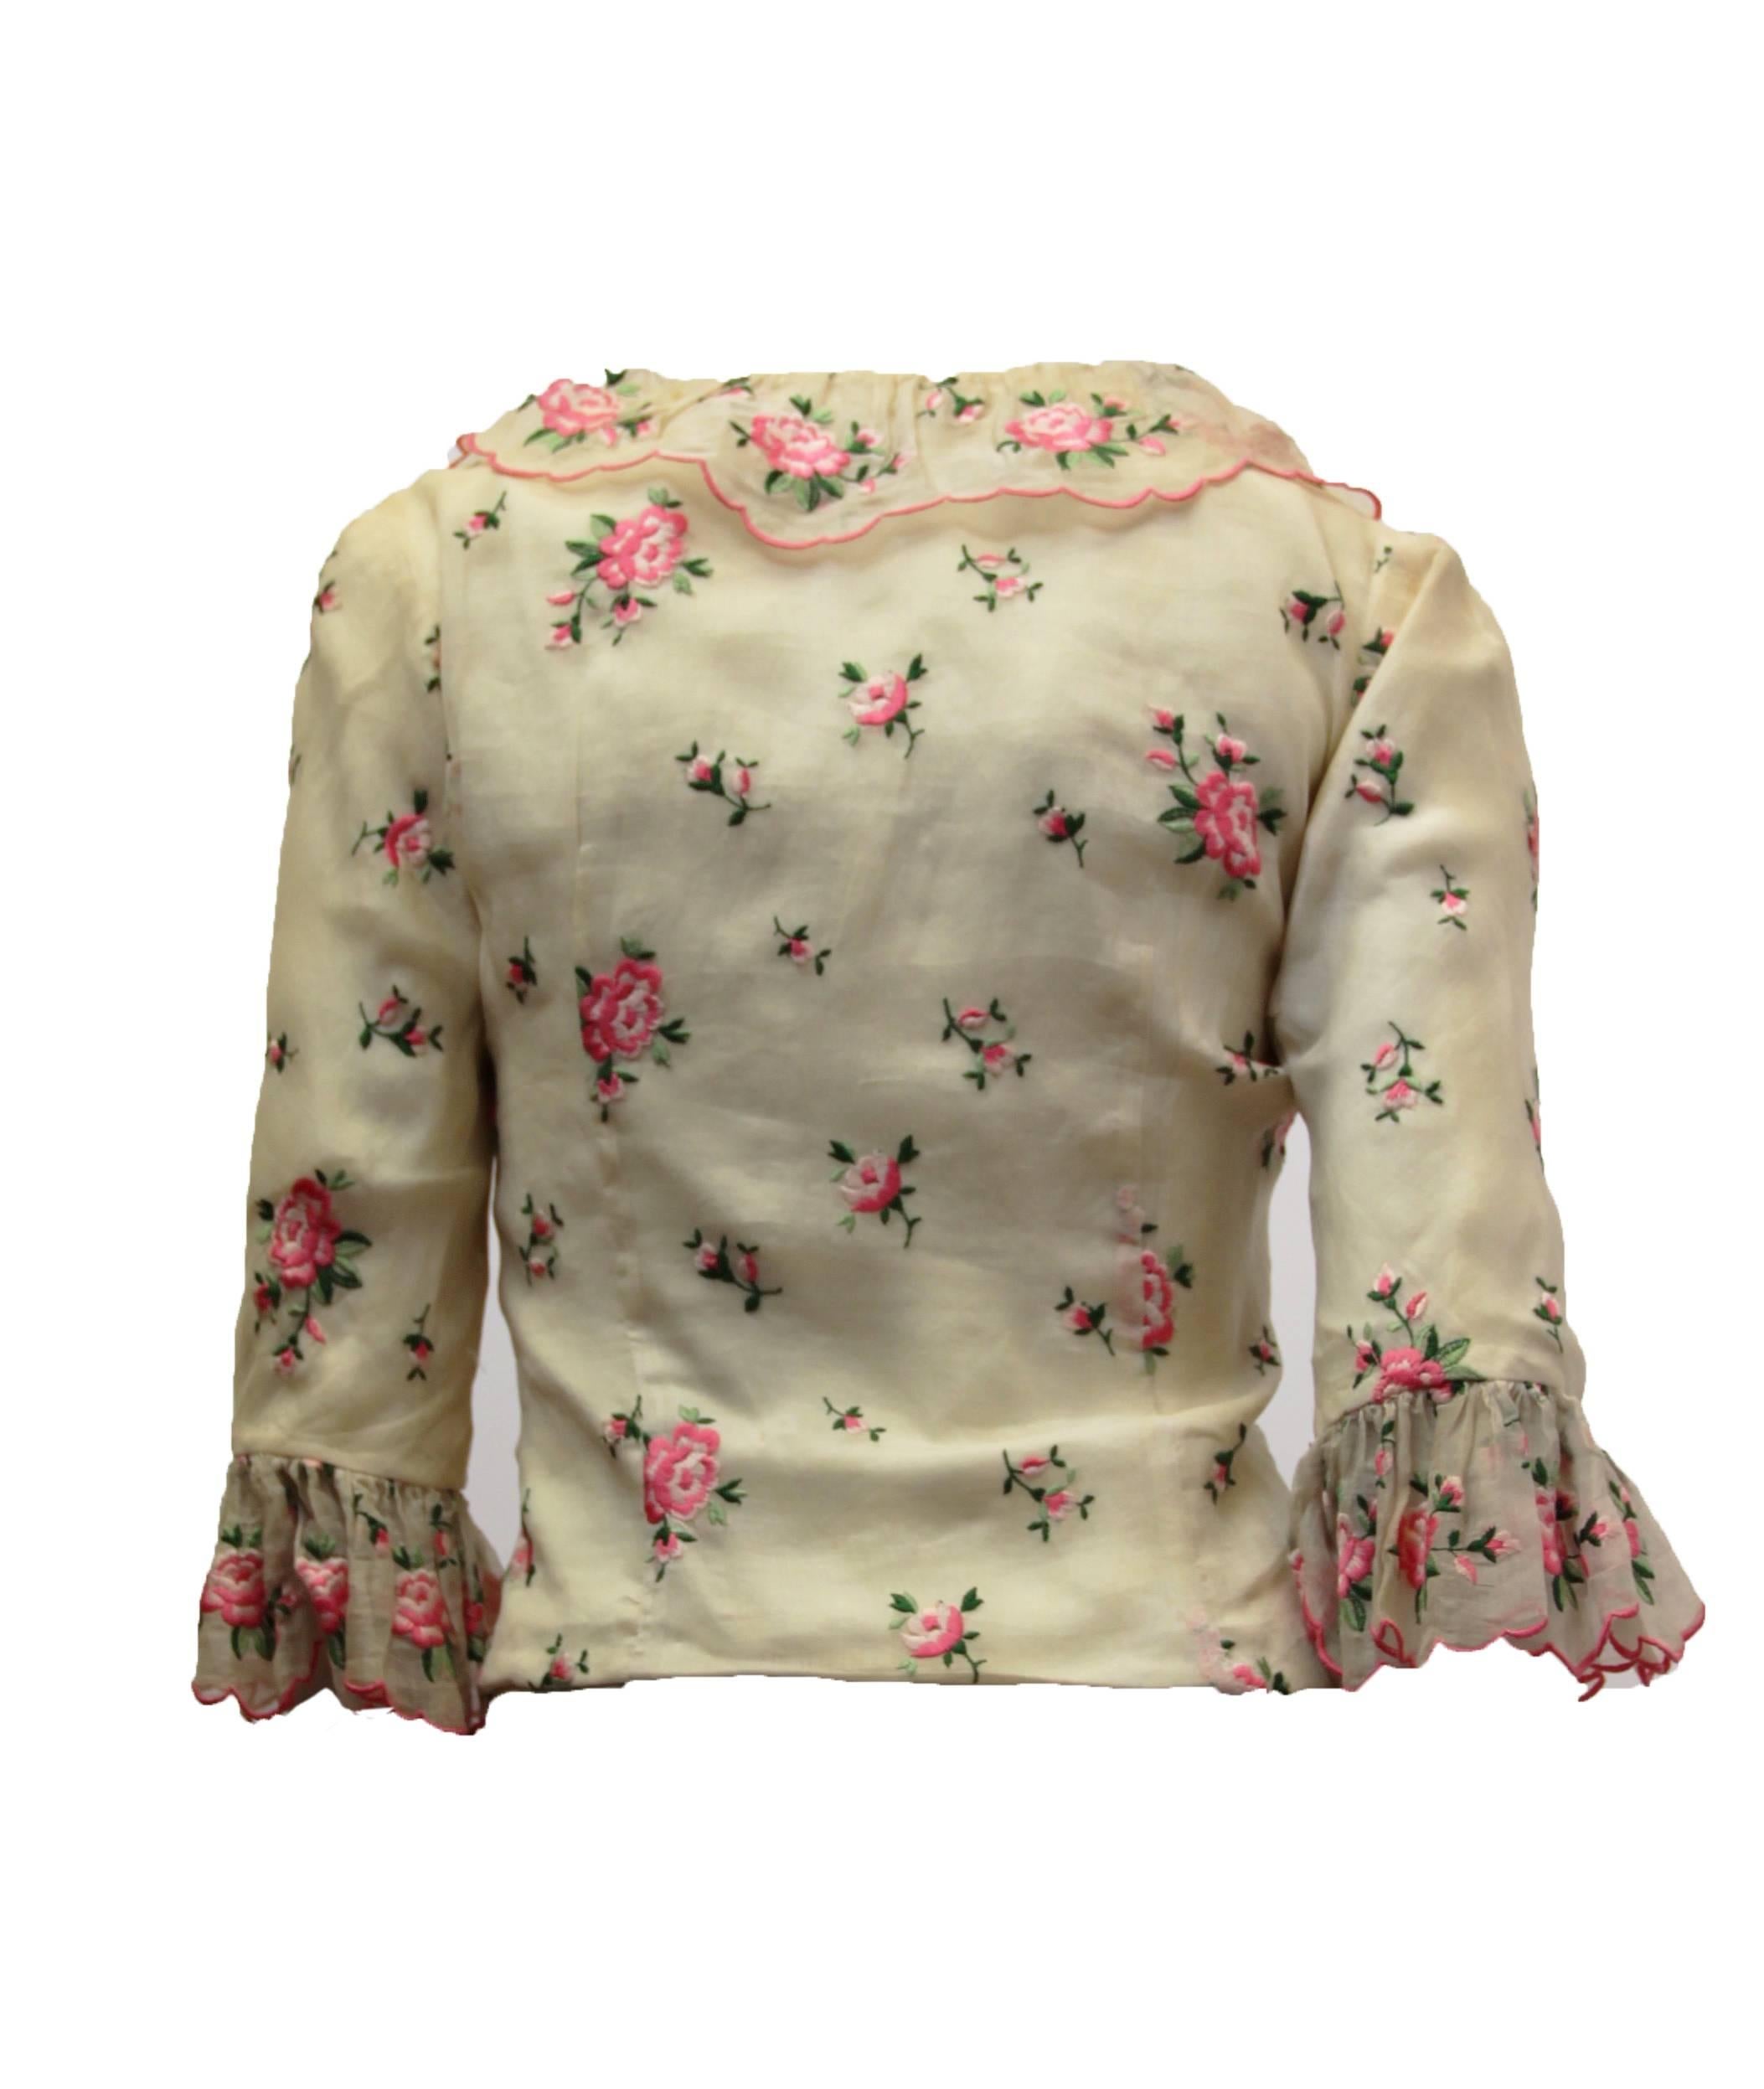 50s Castillo rose embroidered top with ruffle collar and cuffs. Organdy overlay on crepe de chine. Cut out waist line. Snaps up the front. Made in France for I. Magnin  